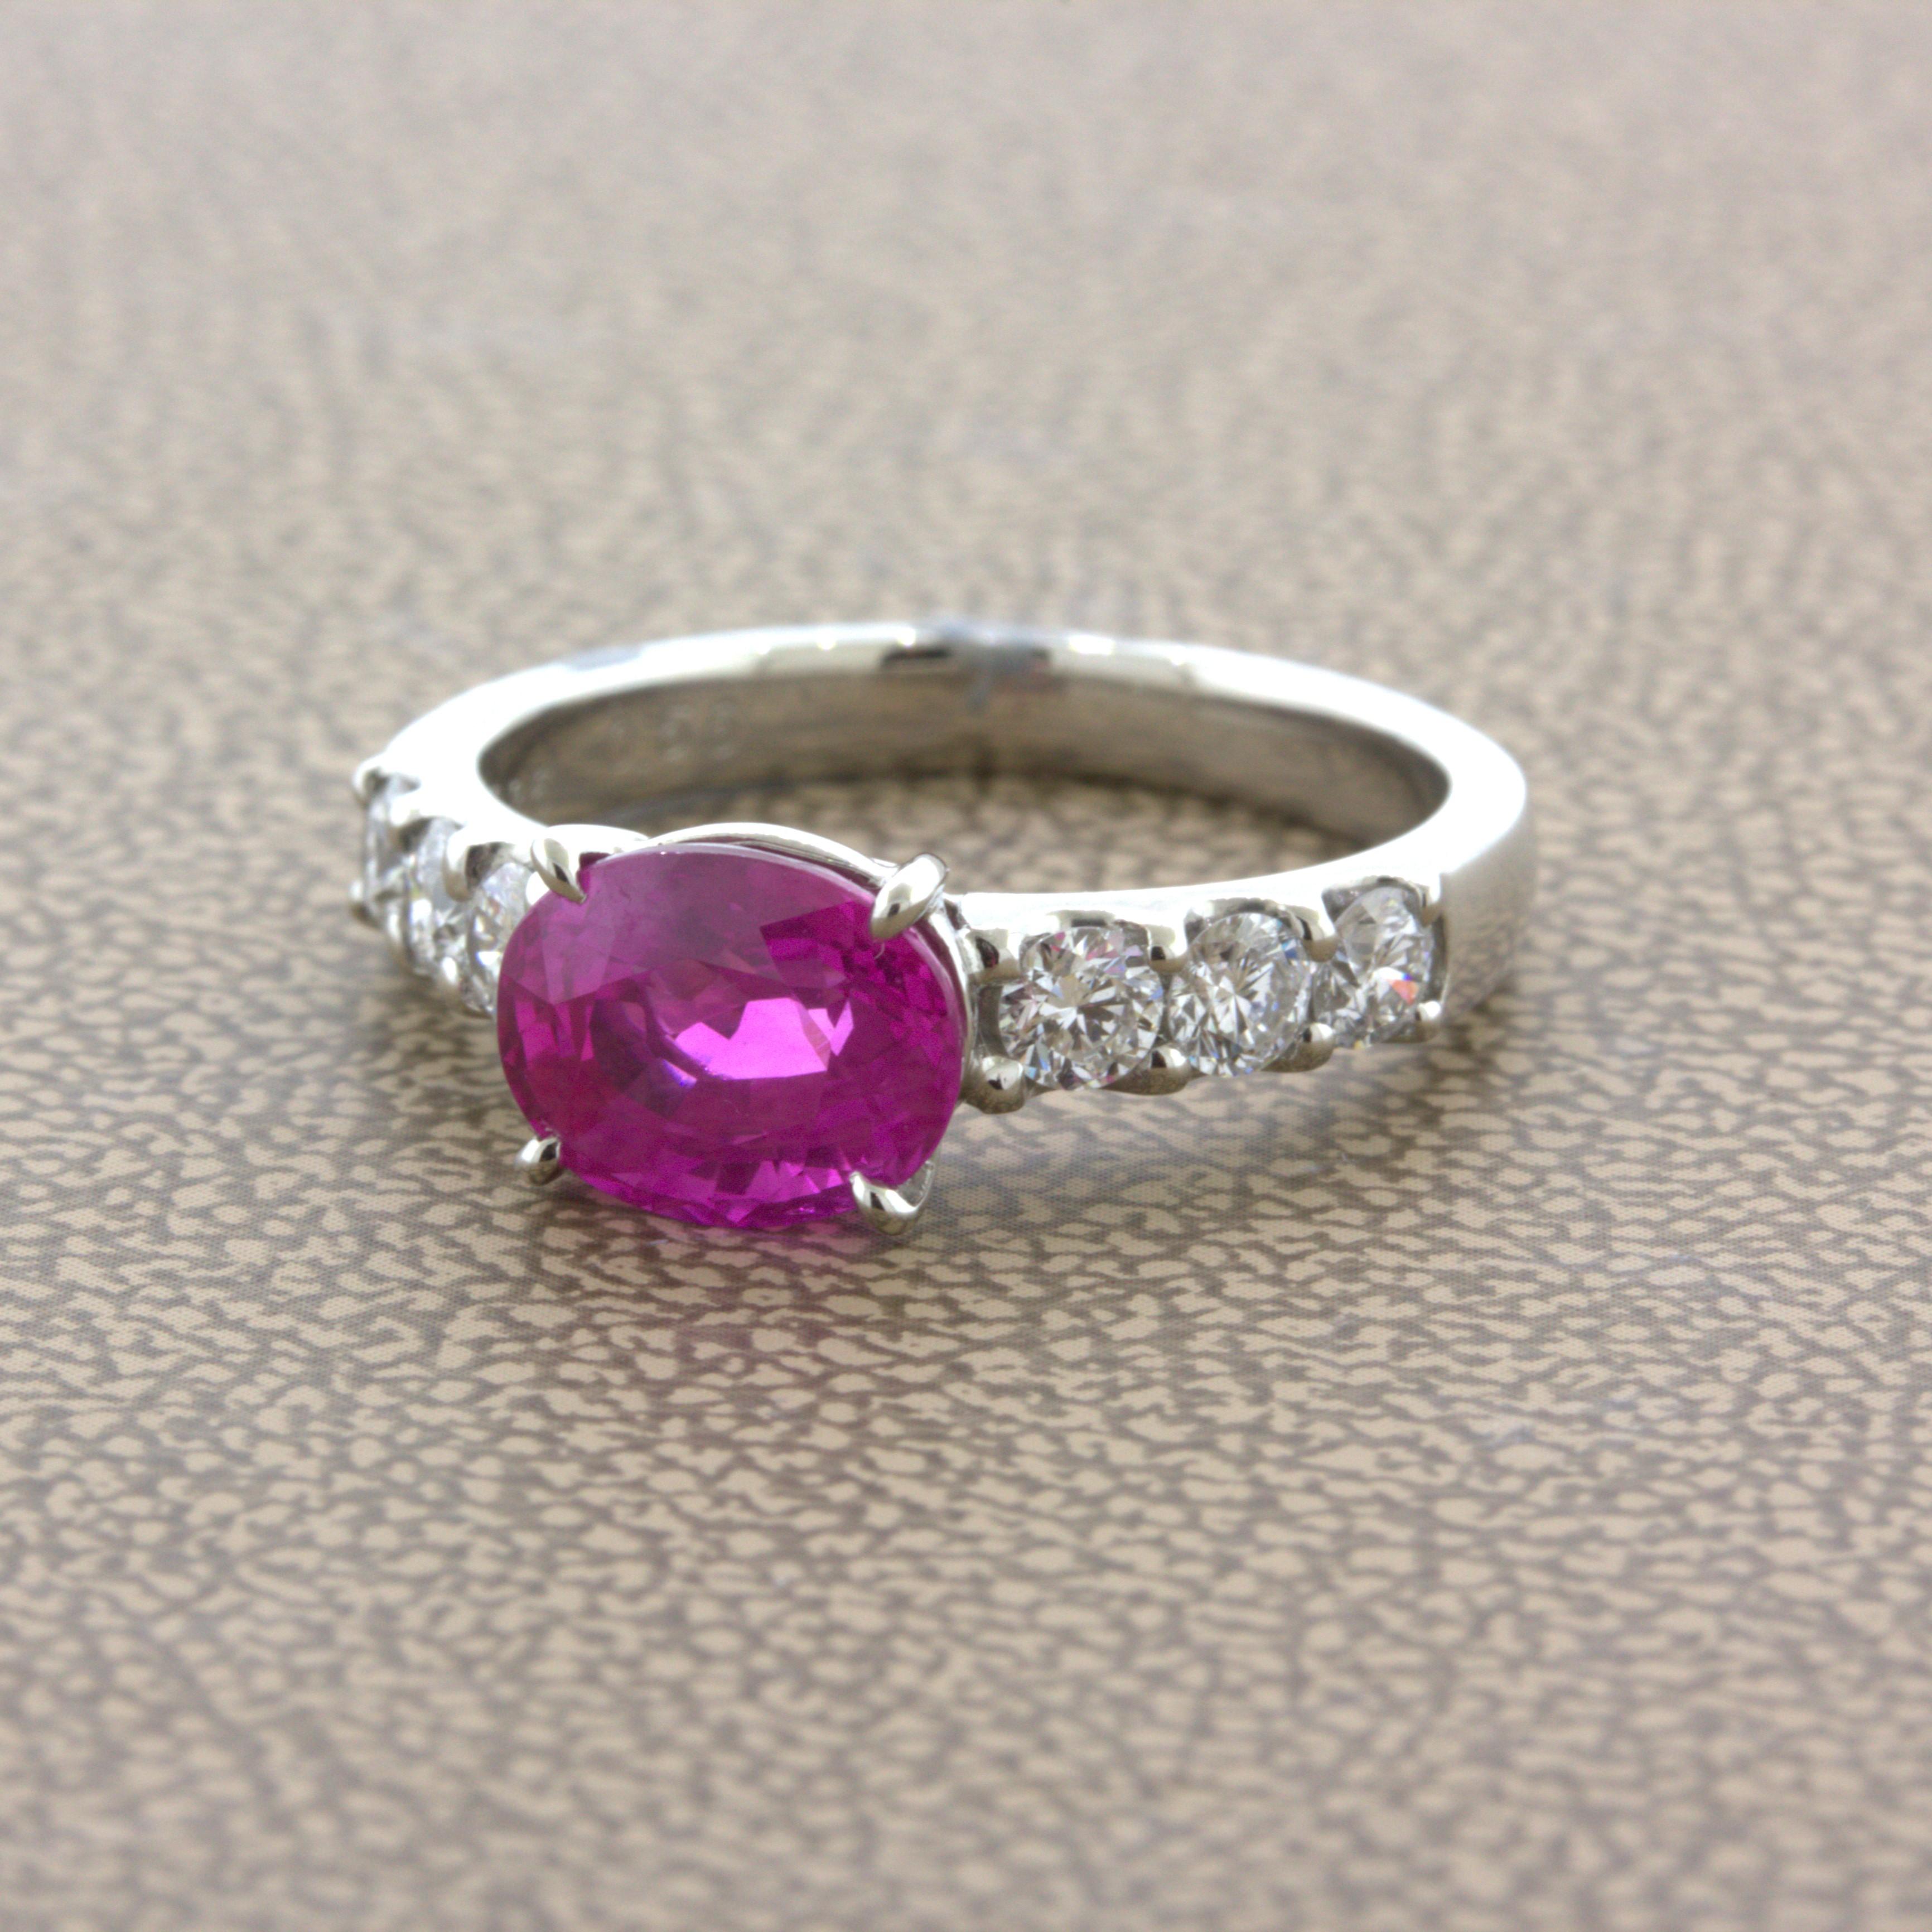 Oval Cut Exceptional 2.36 Carat Hot-Pink Sapphire Diamond Platinum Ring, GIA Certified For Sale